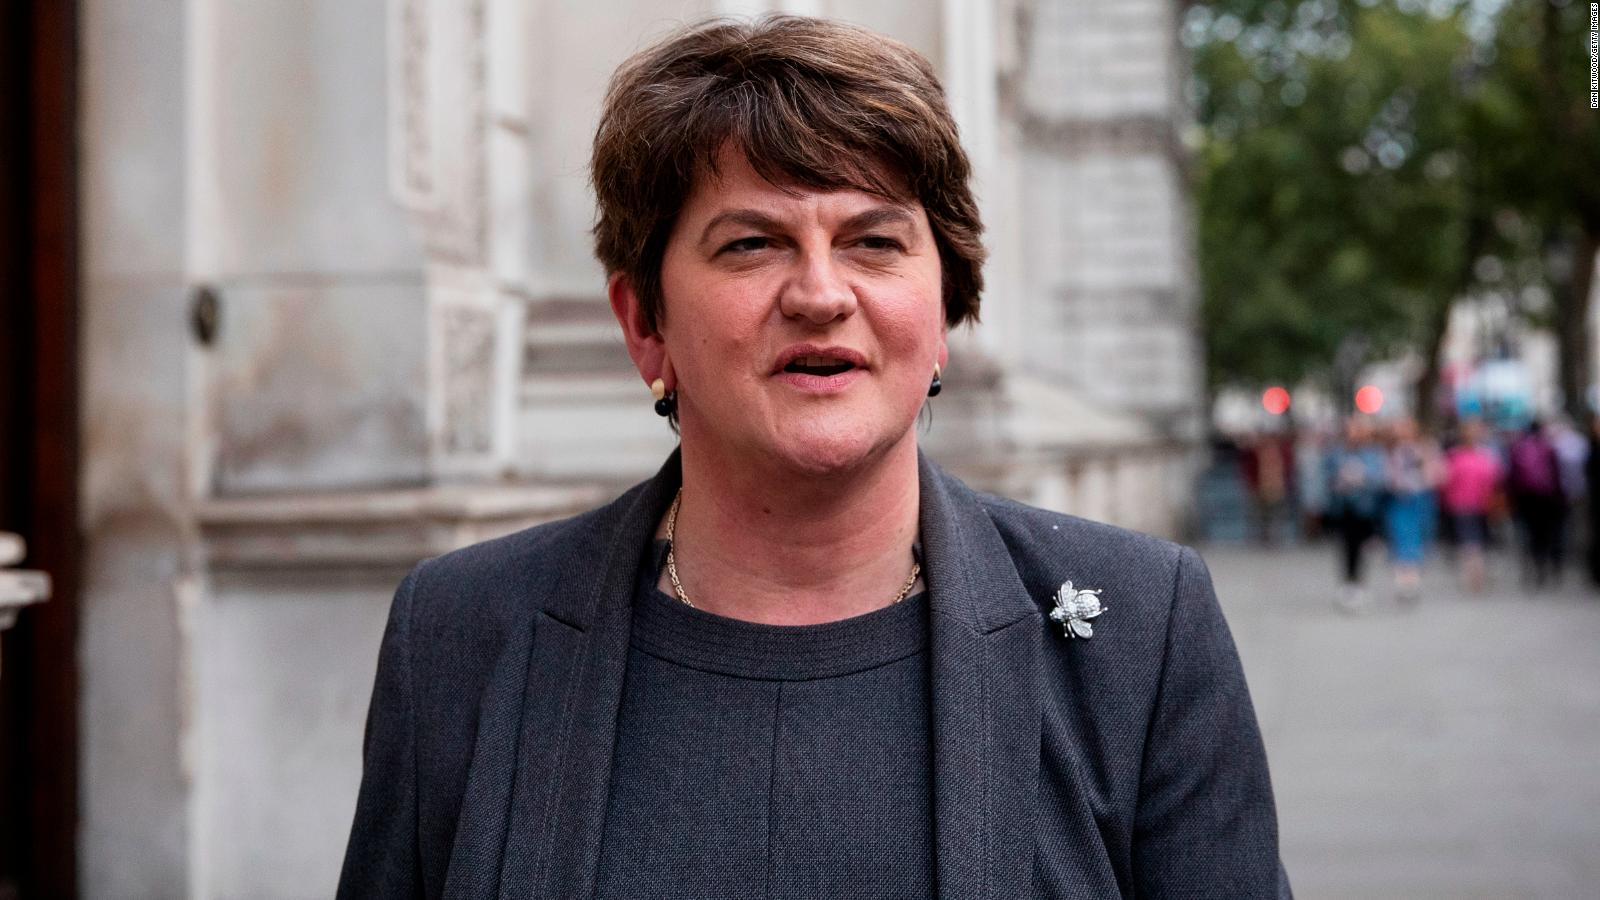 Arlene Foster Becomes First Minister After Northern Ireland Power Sharing Deal Reached Cnn